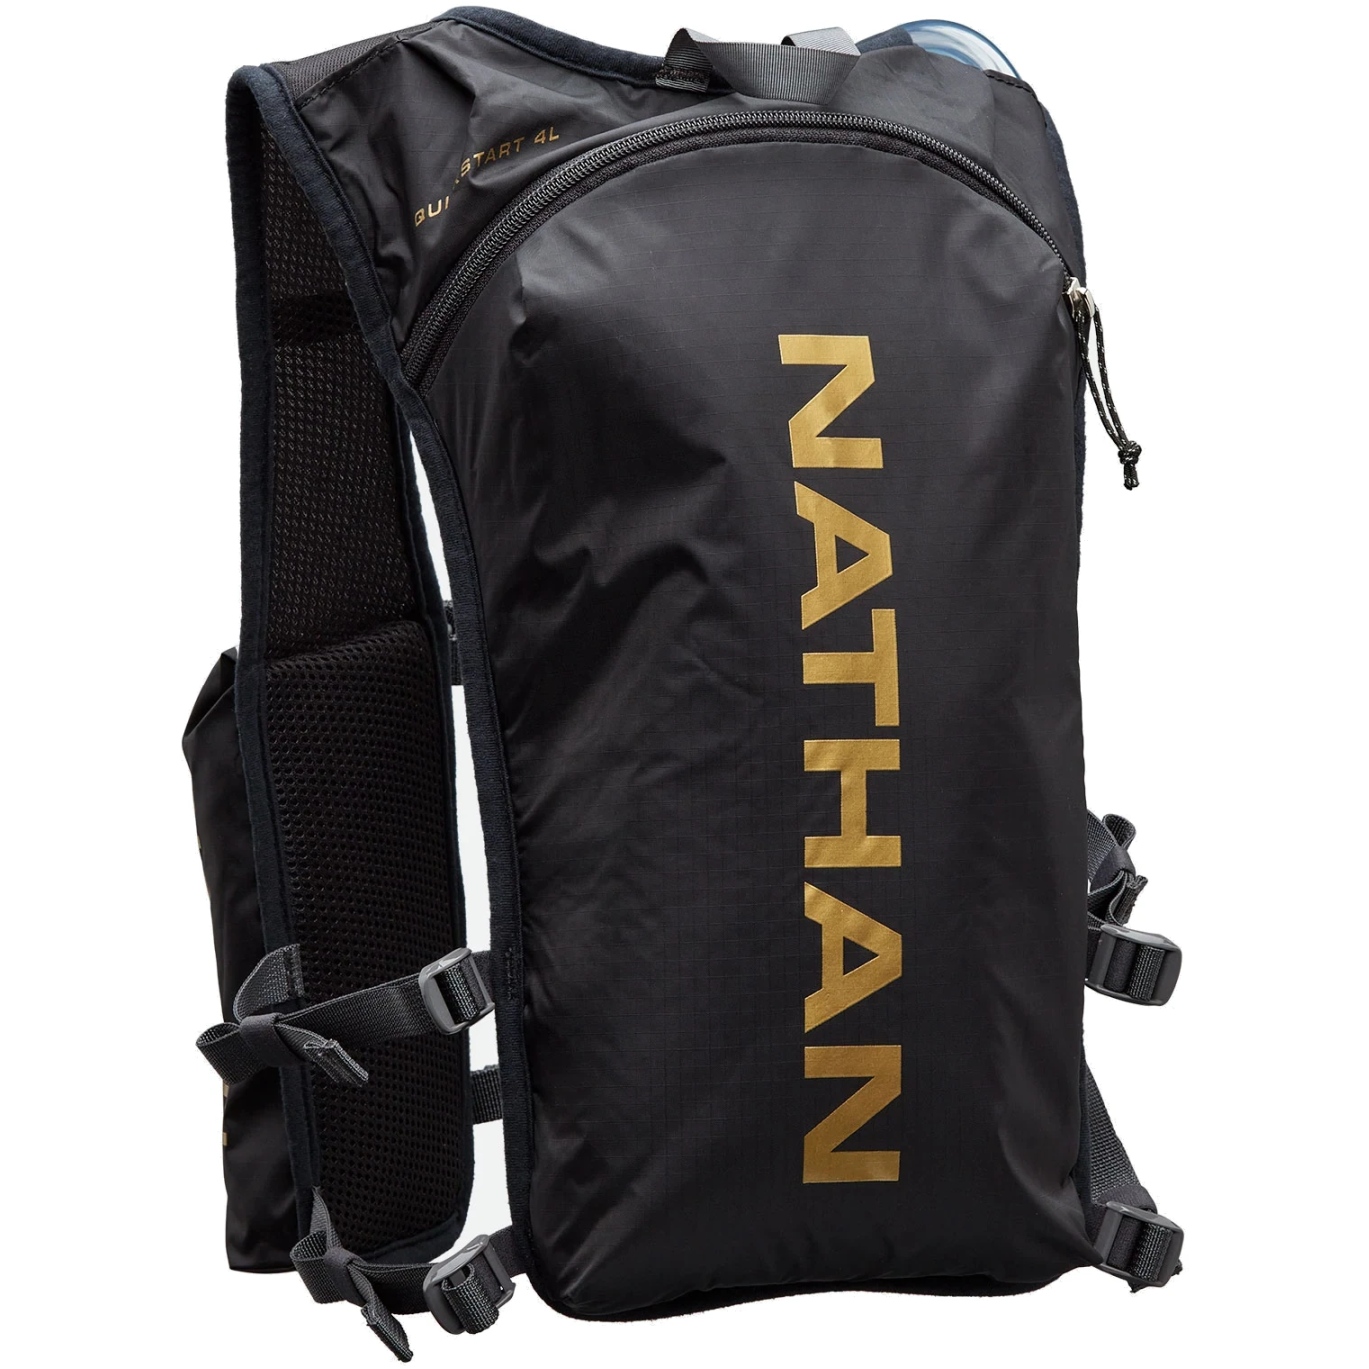 Productfoto van Nathan Sports QuickStart Race Pack Hydration Pack - 4L - black / gold